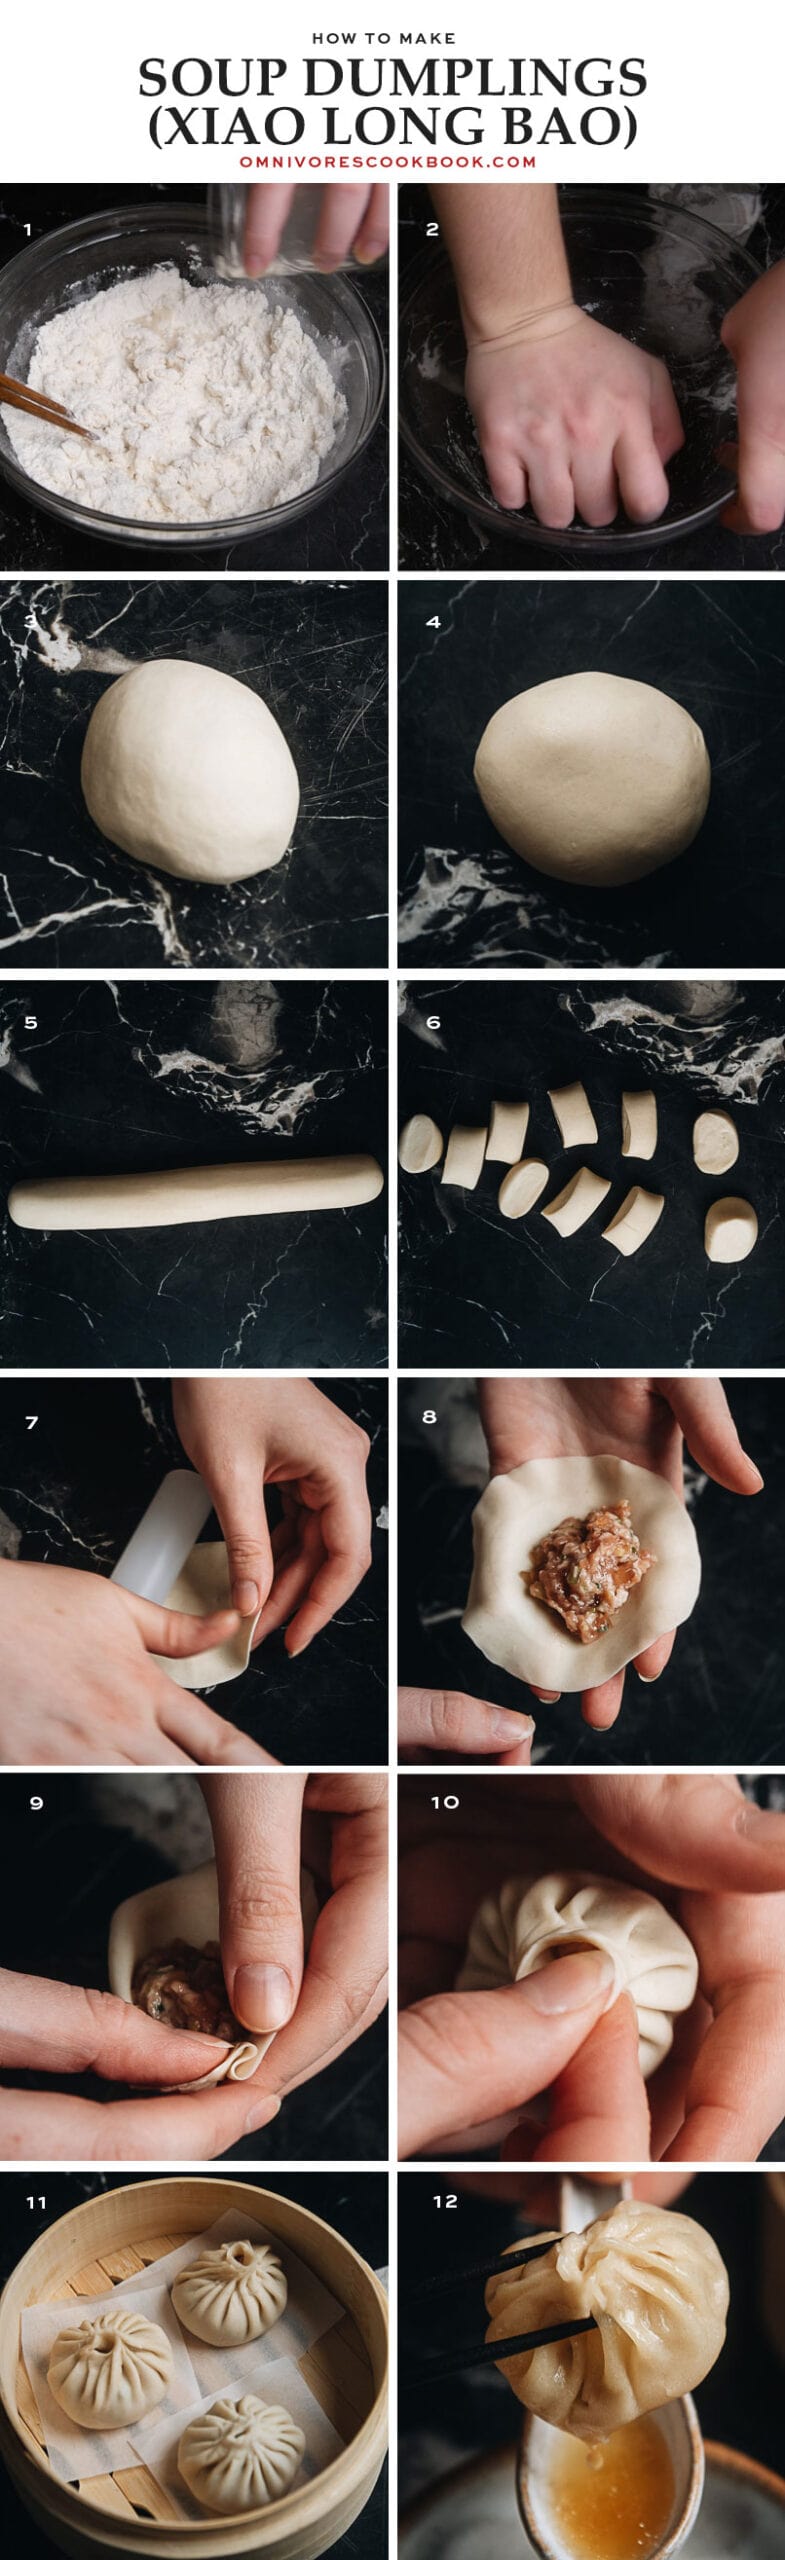 How to make soup dumplings step-by-step